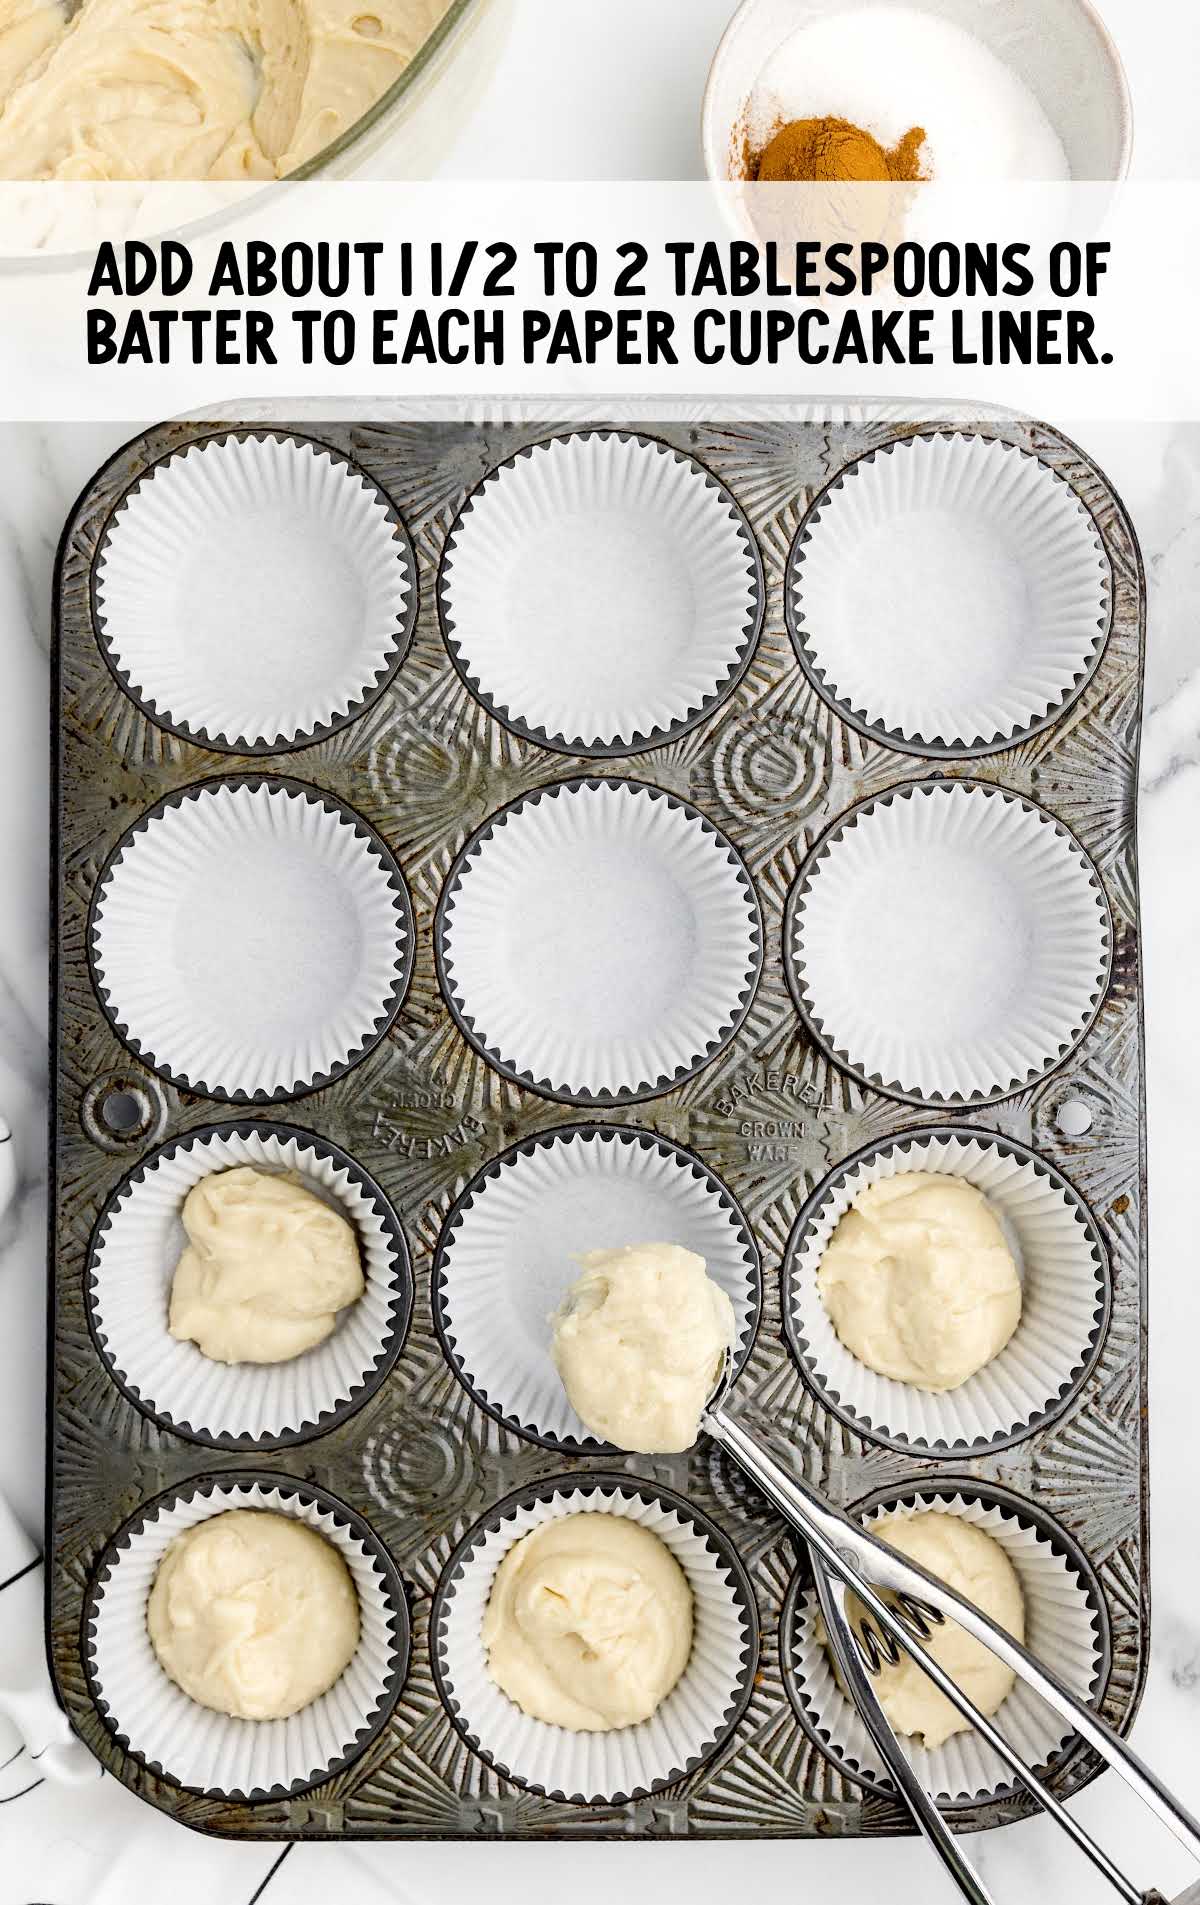 batter added to each paper cupcake liner